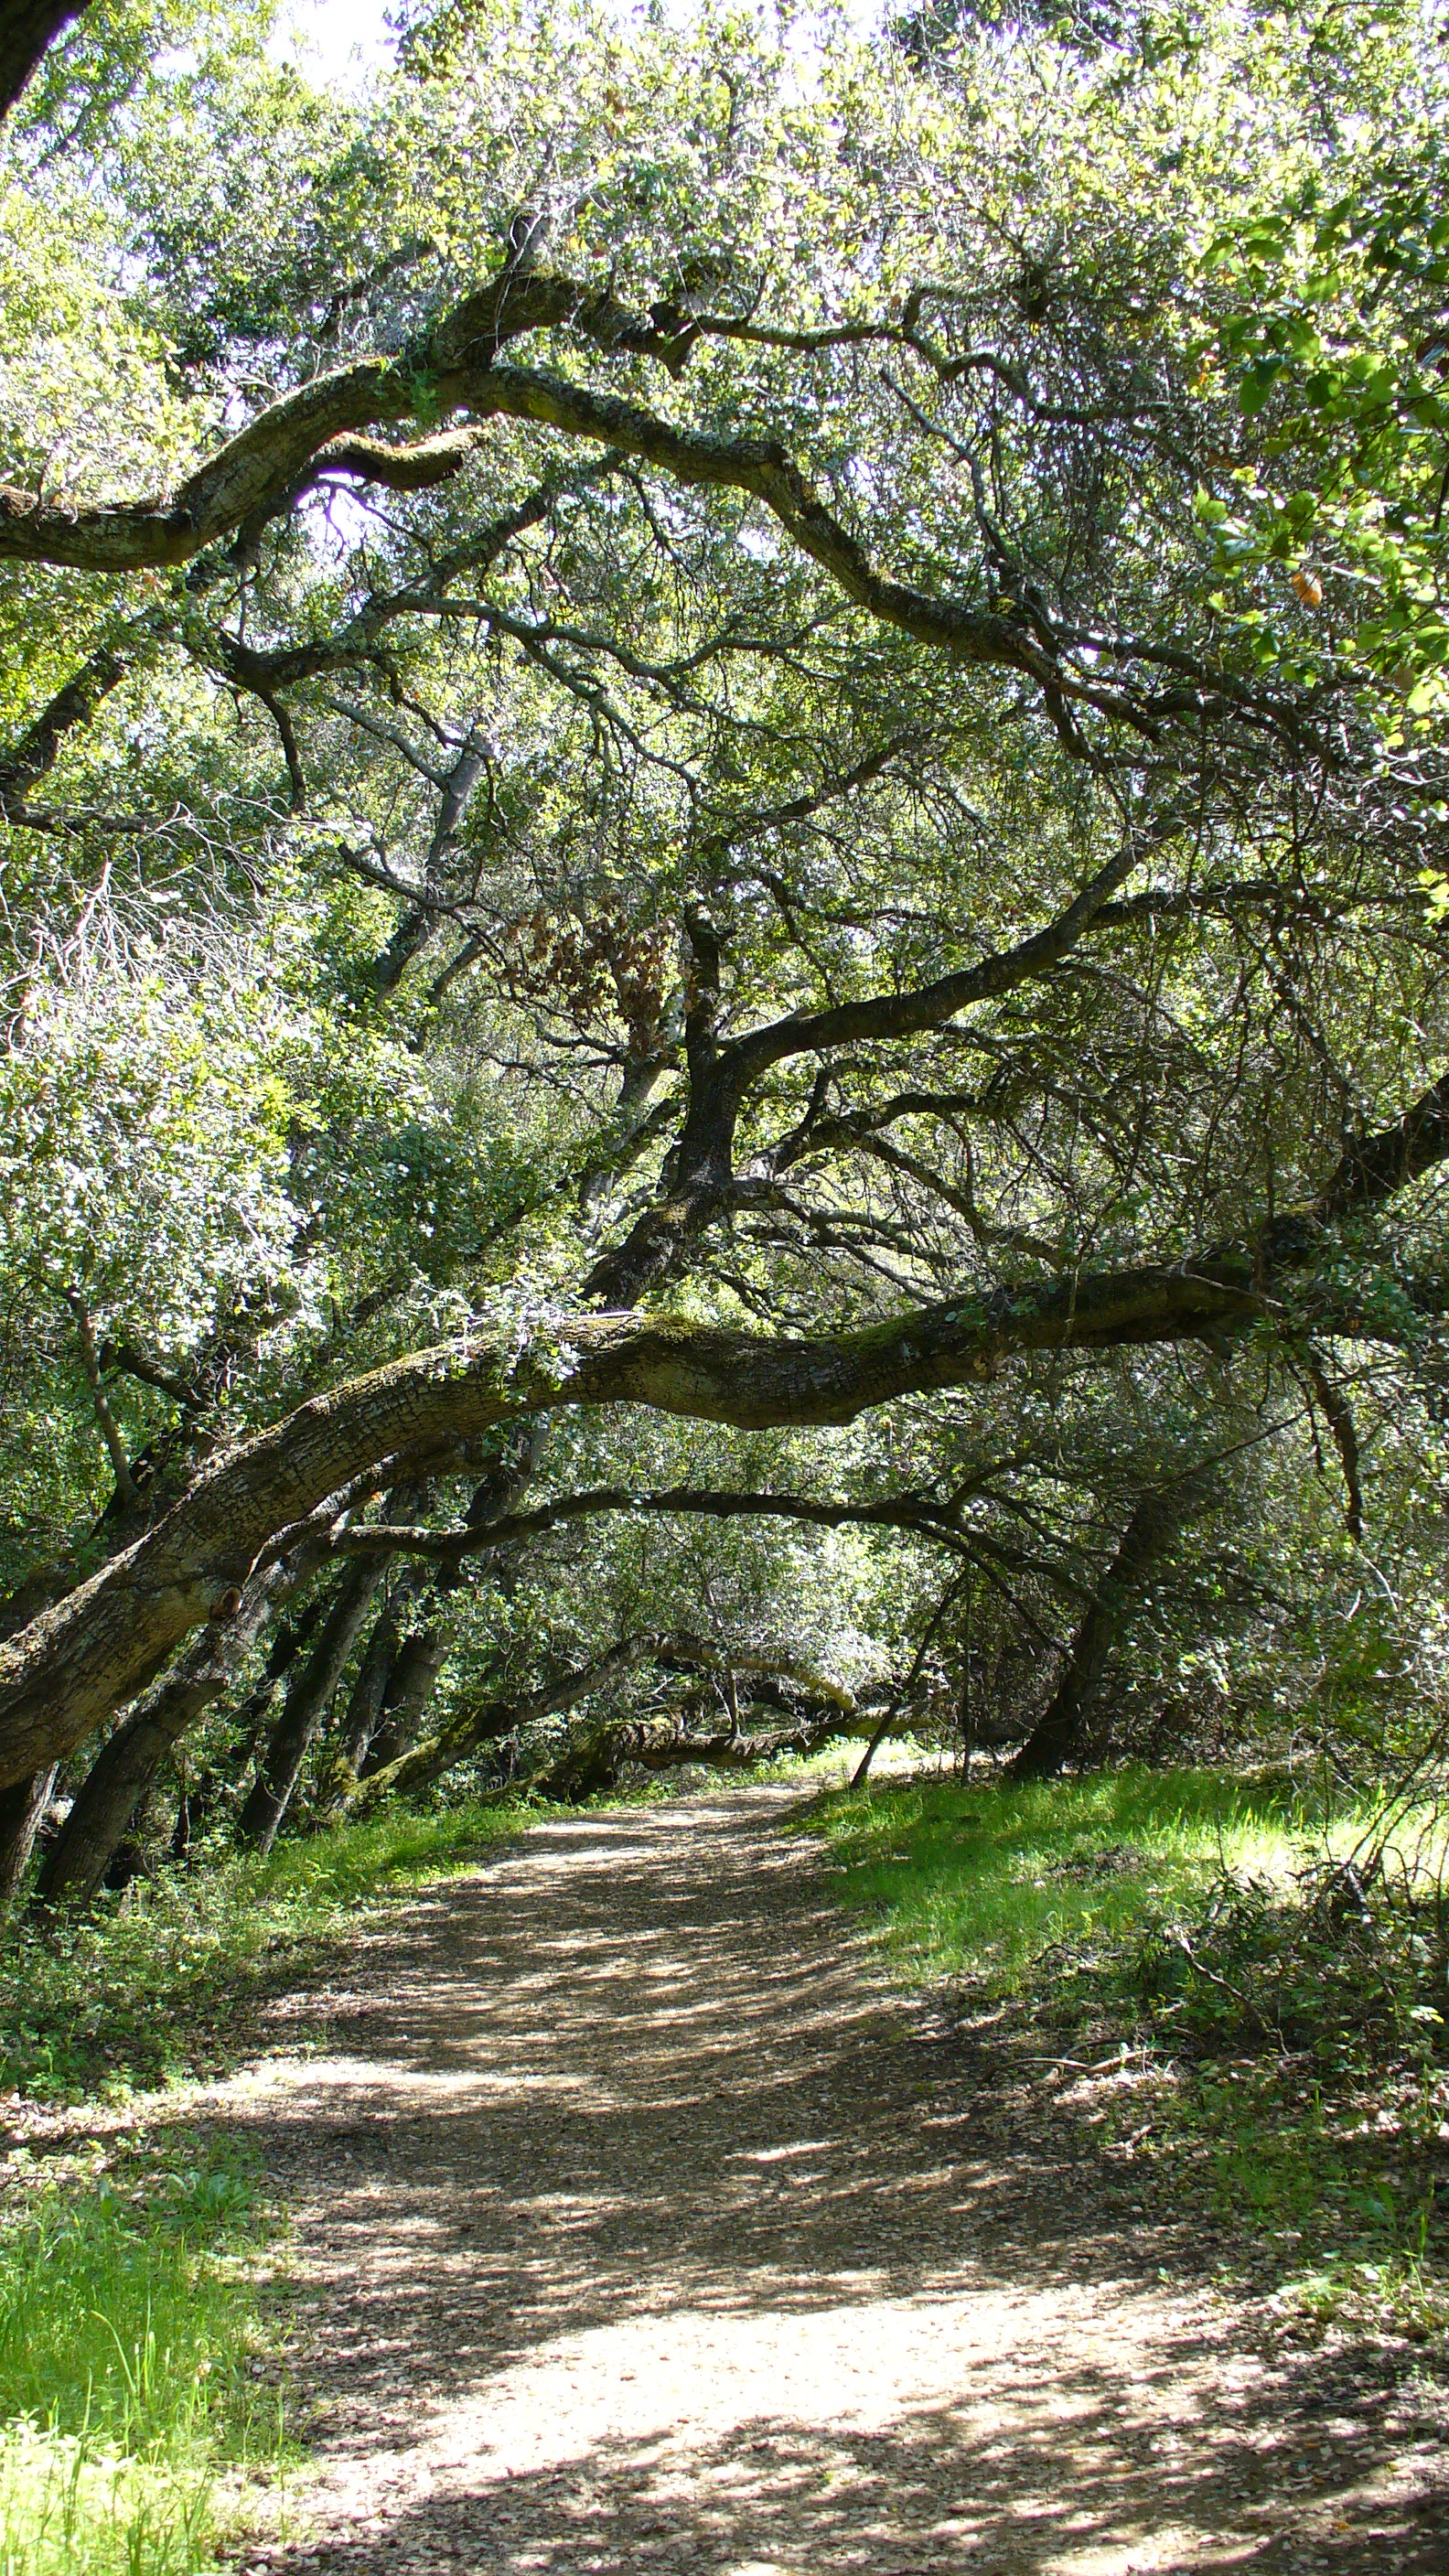 A canopy over the trail